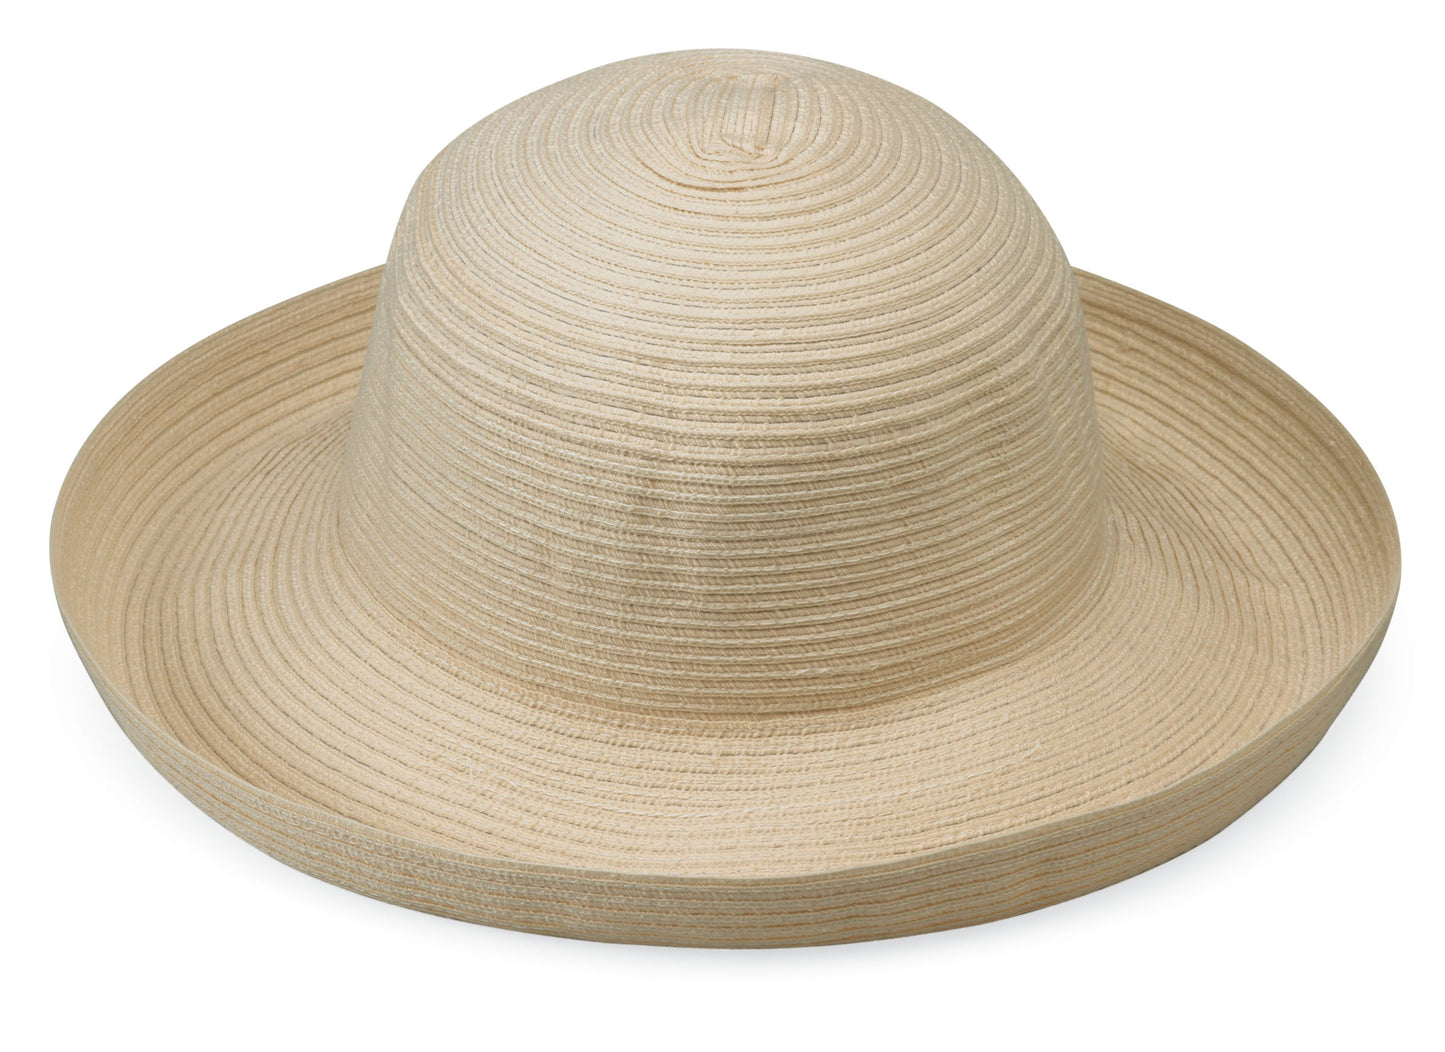 This packable off-white beach hat not only offers UPF 50+ sun protection but is also recommended by the Skin Cancer Foundation. Its wide brim ensures stylish sun coverage, making it a travel-friendly and fashionable addition to your personal fashion collection.